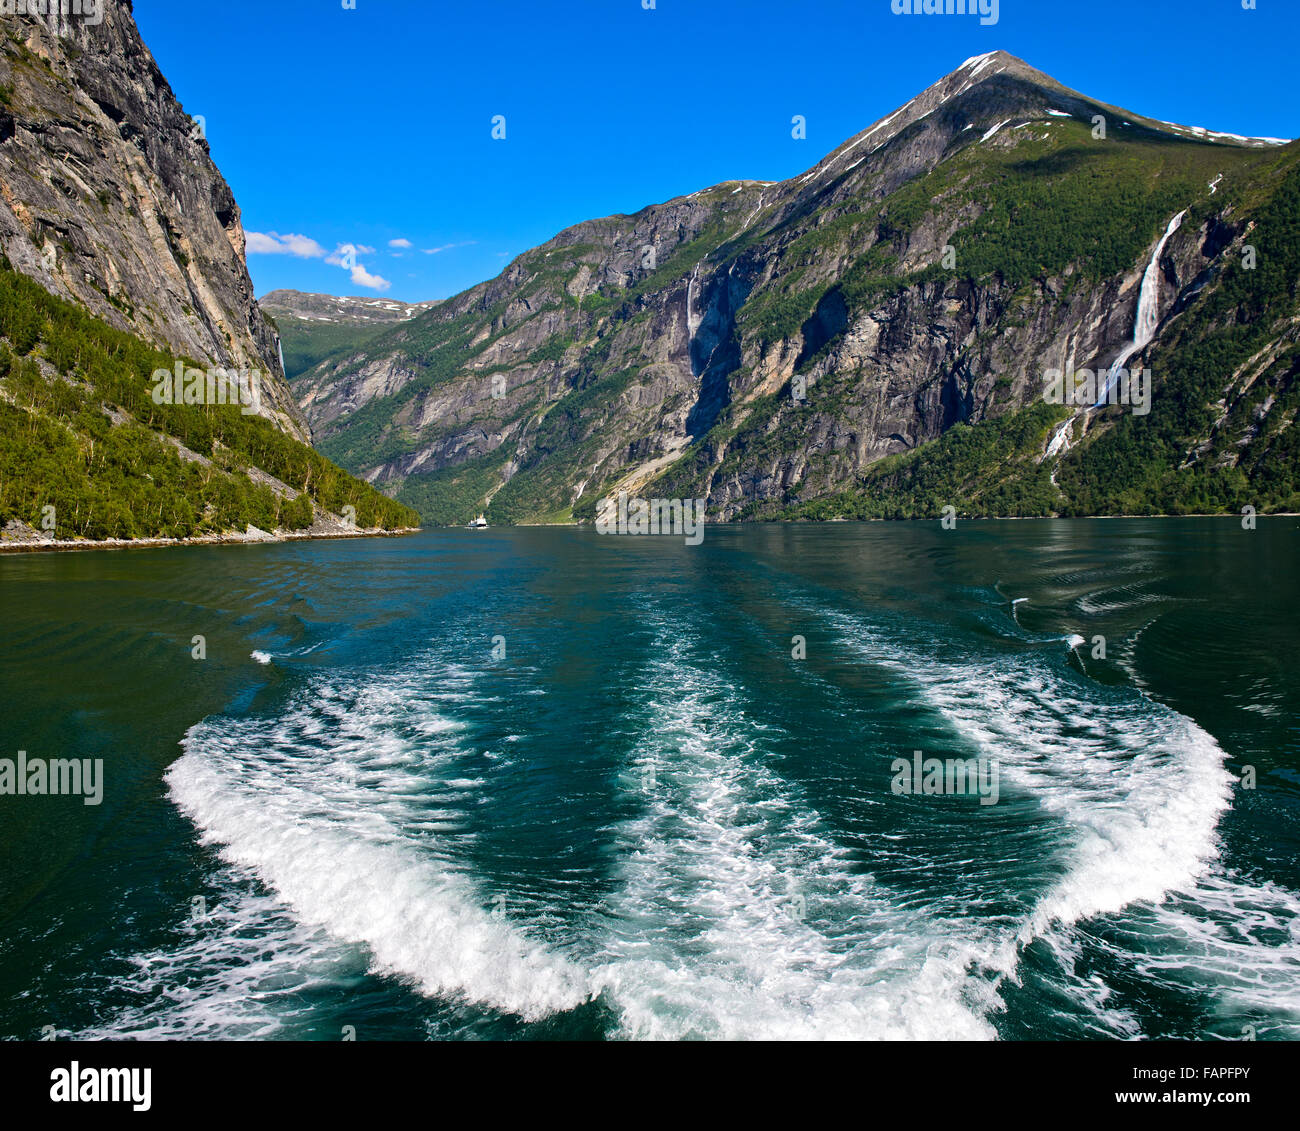 Fjord landscape in the UNESCO World Heritage Site Geiranger Fjord near Geiranger, Norway Stock Photo